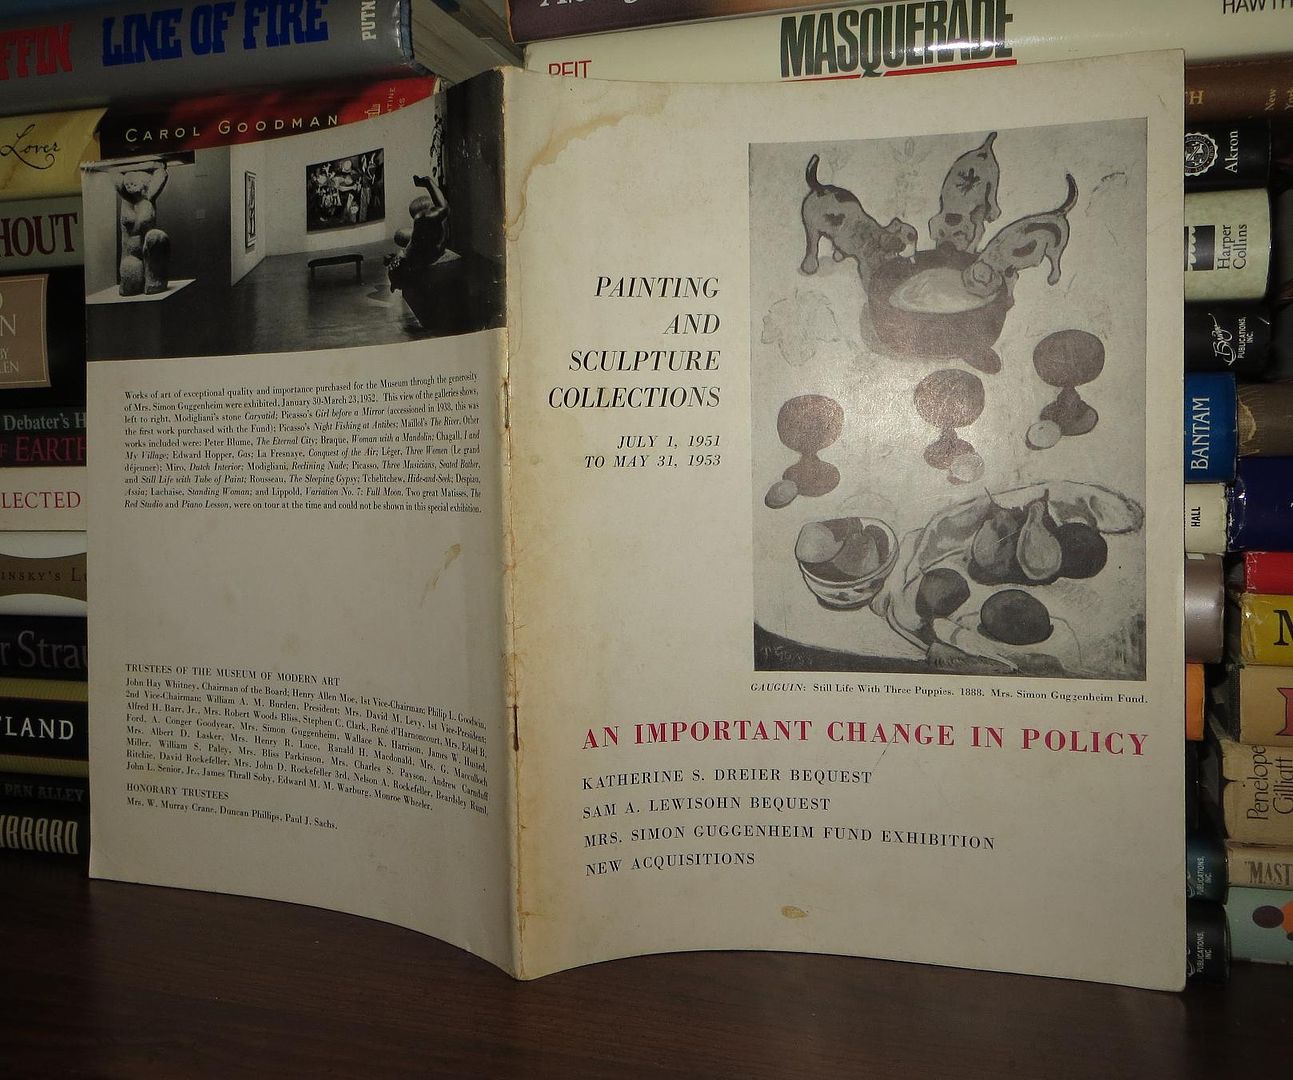 DREIER, KATHERINE S. ; LEWISOHN, SAM A. - Painting and Sculpture Collections July 1, 1951 to May 31, 1953 an Important Chance in Policy